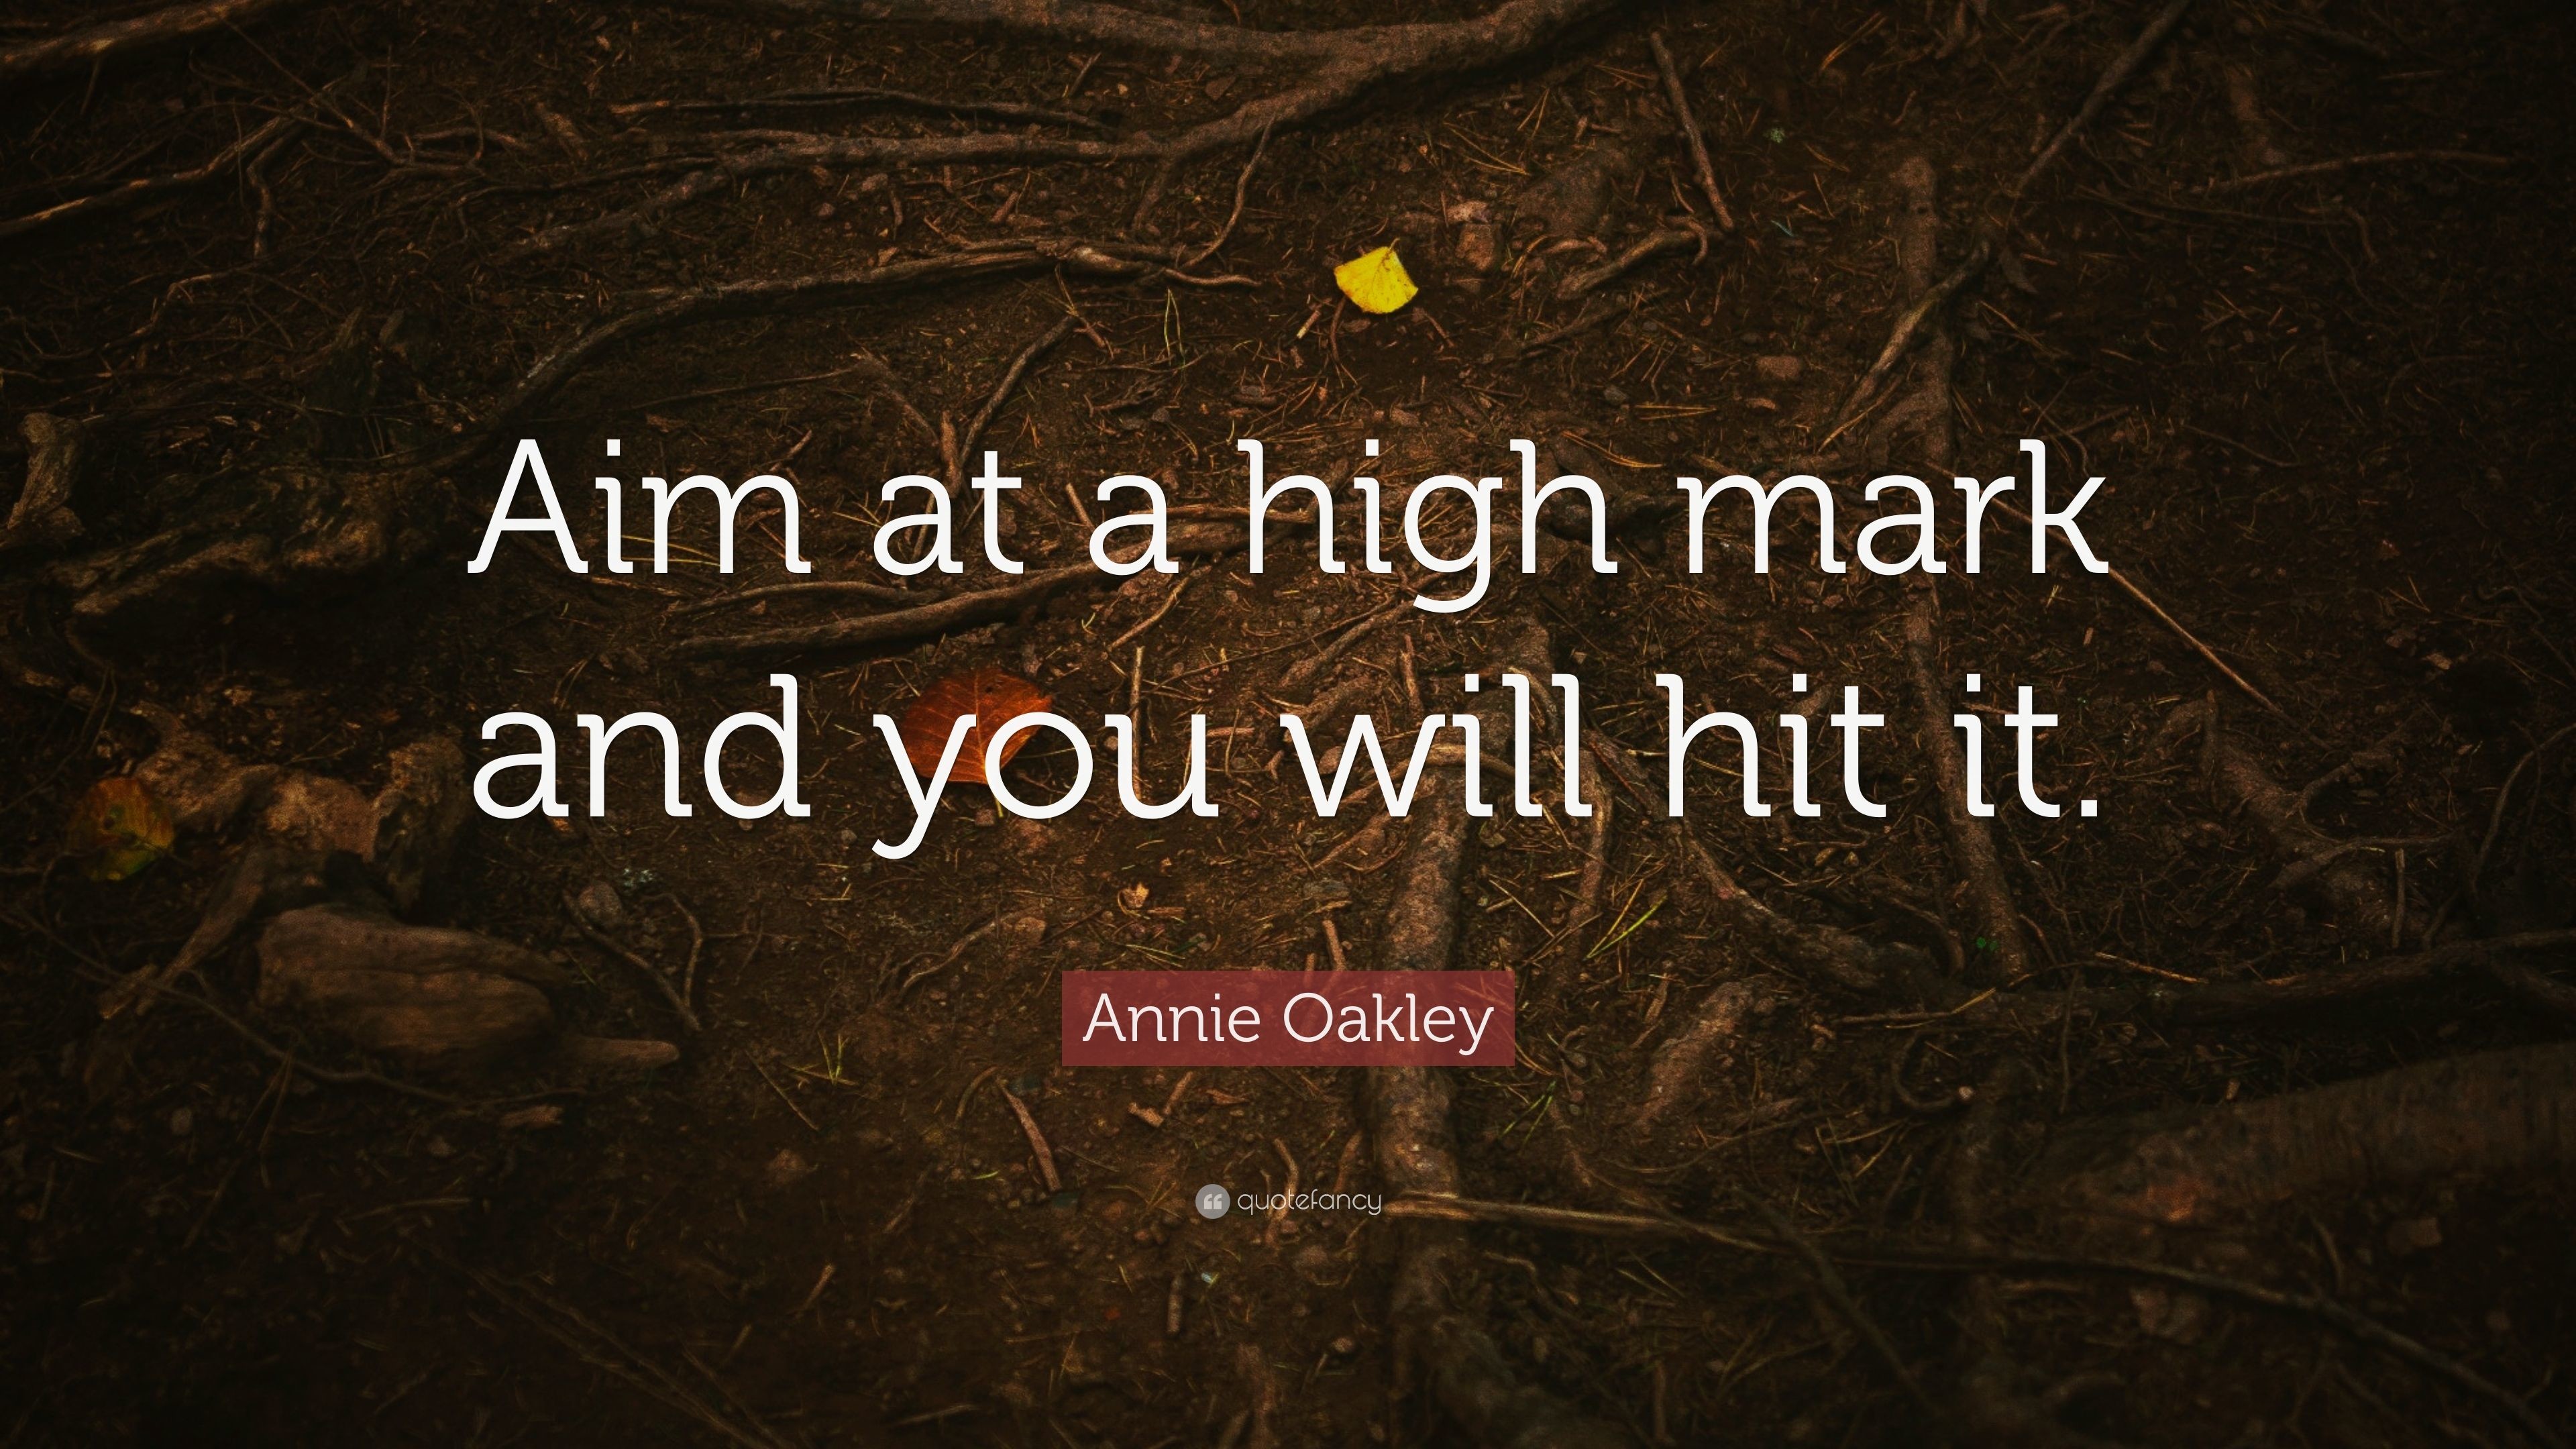 3840x2160 Annie Oakley Quote: “Aim at a high mark and you will hit it.